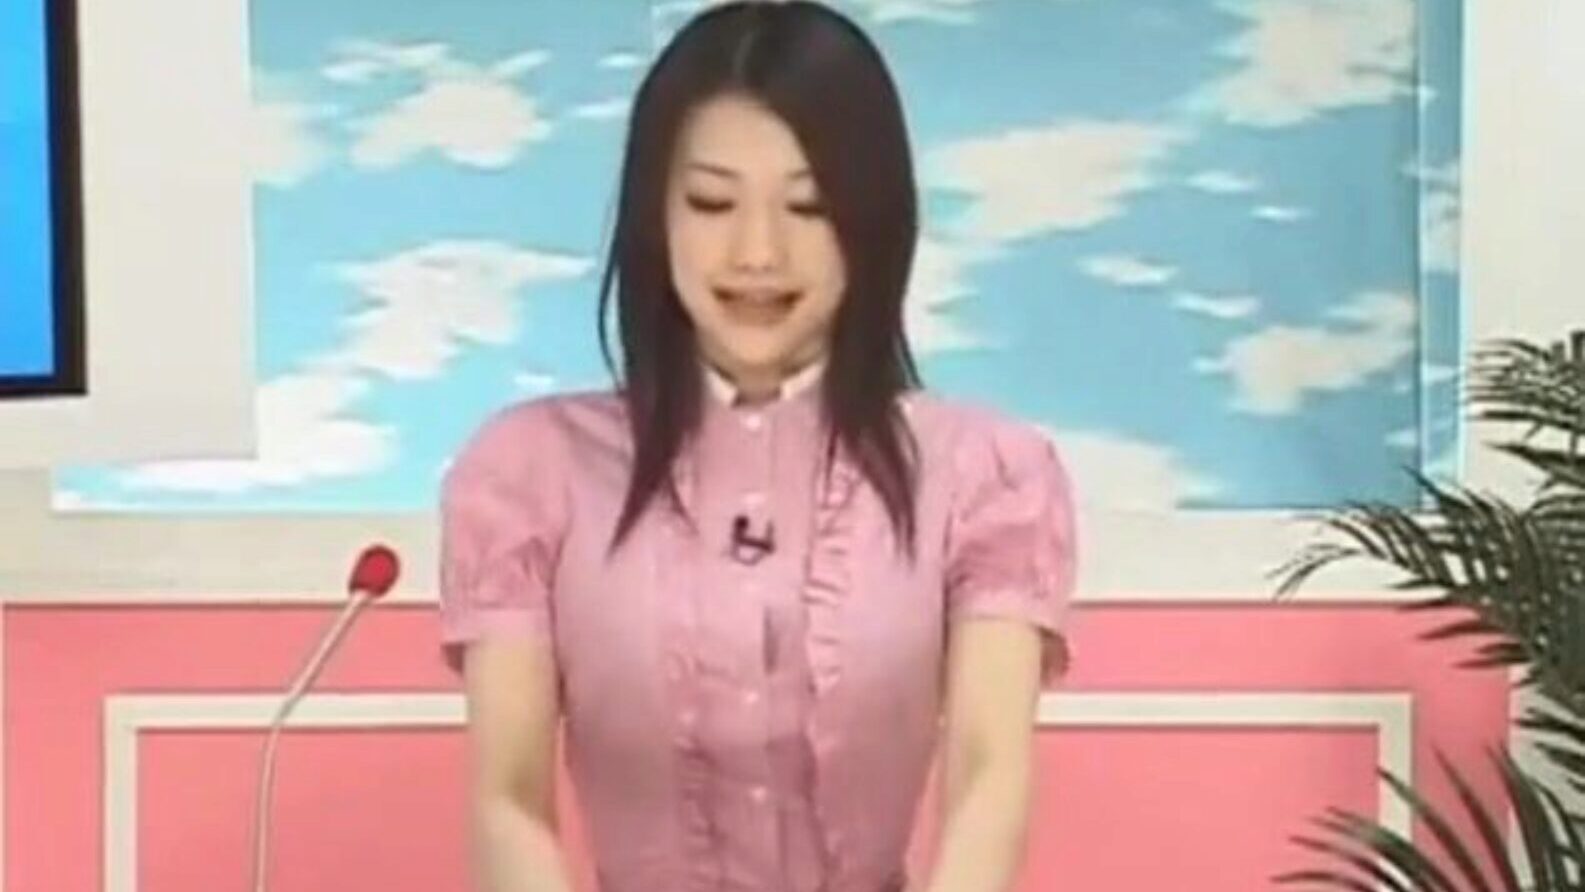 Japanese reporter pumped as this babe reports the news